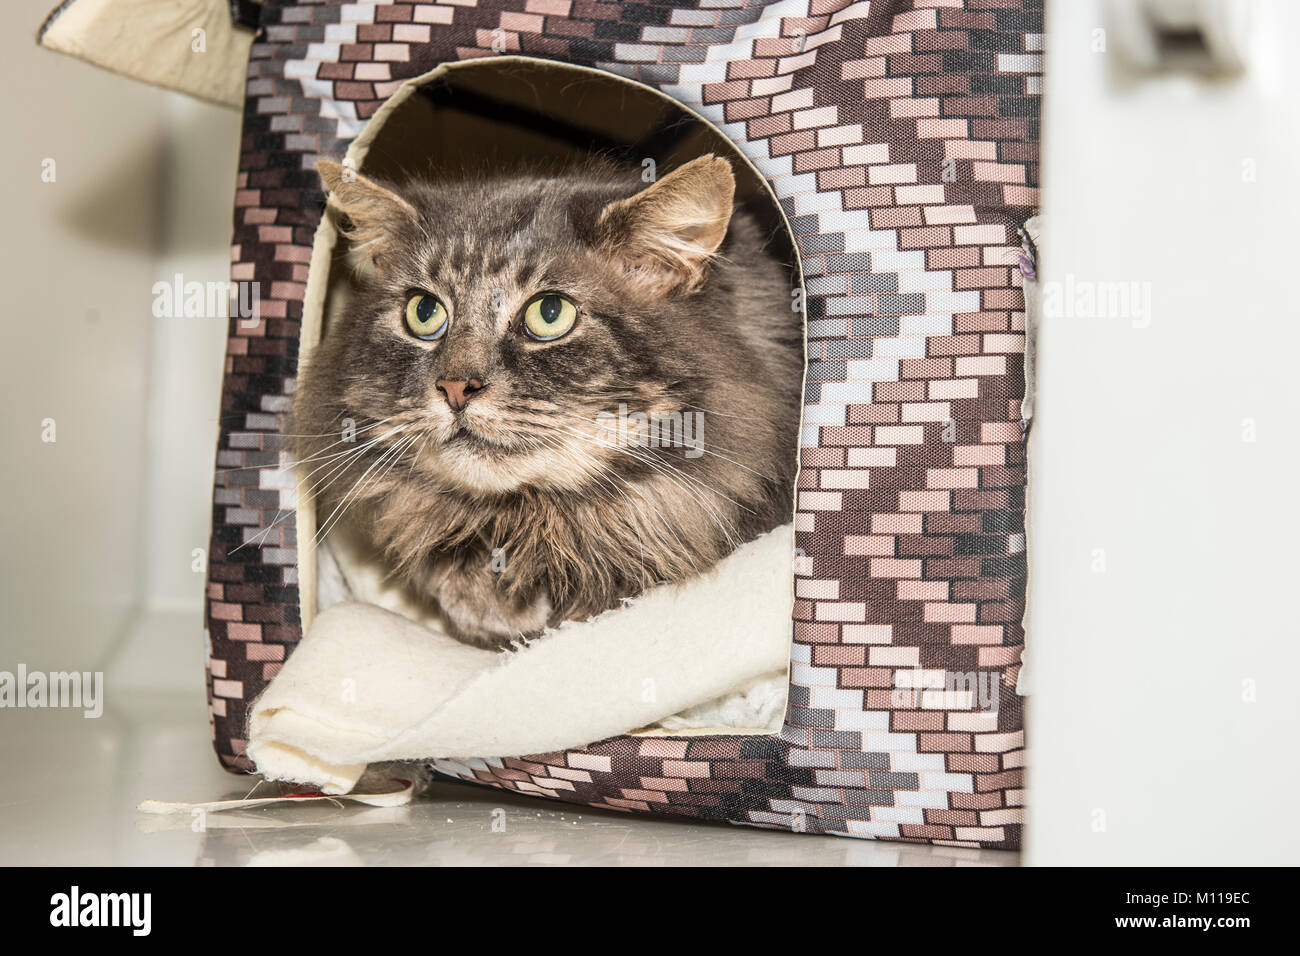 longhaired tabby cat in its bed Stock Photo